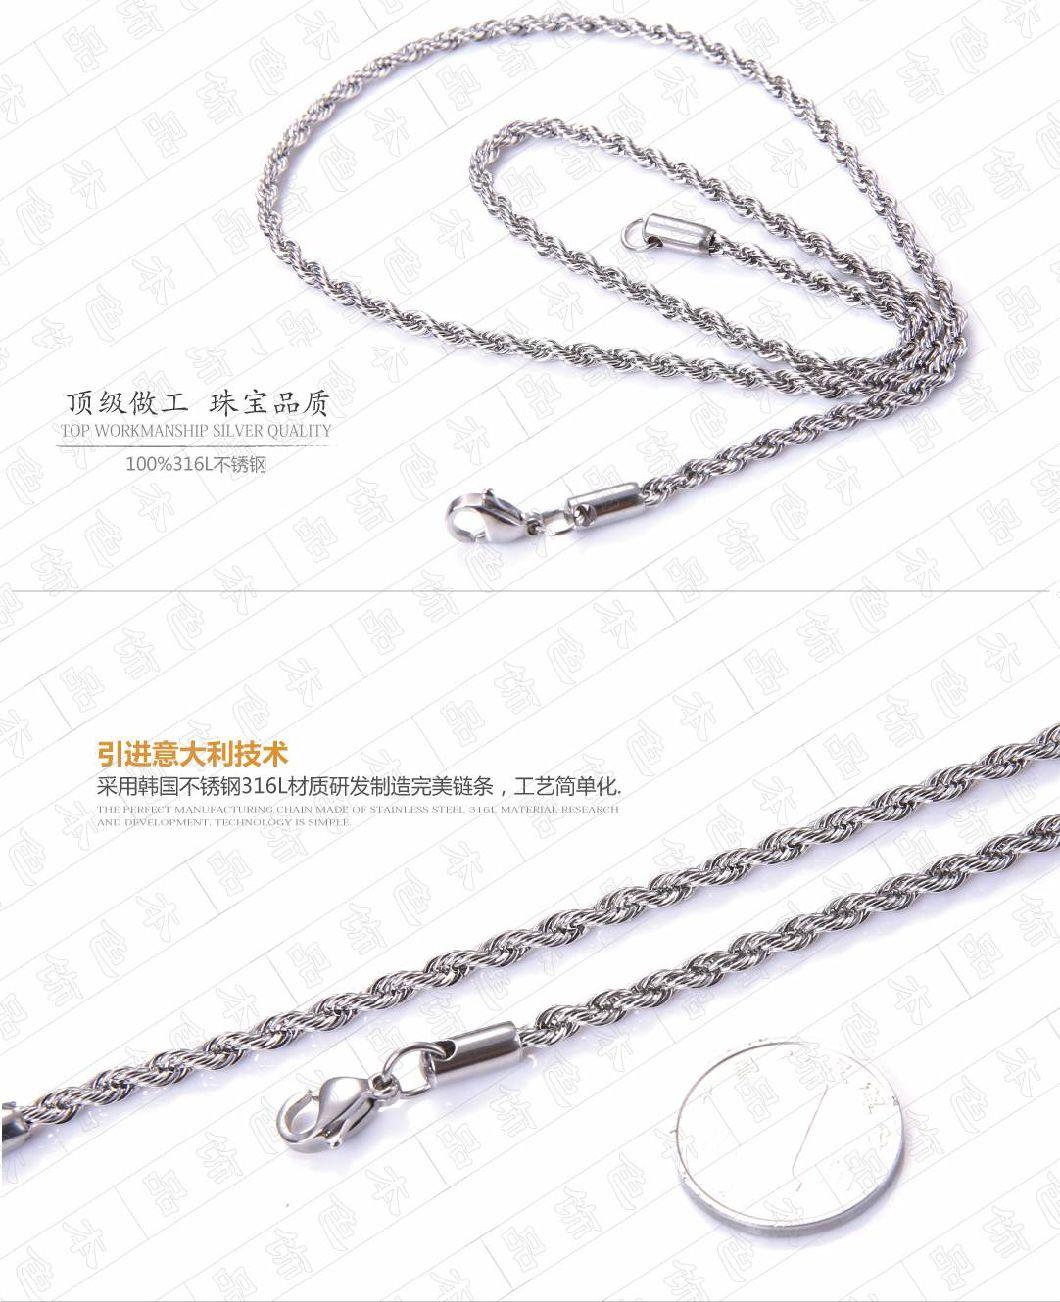 18K Gold PVD Plated Rope Chain 2.5mm-5mm Stainless Steel Chain Necklace for Unisex Chains 16 Inches to 36 Inches